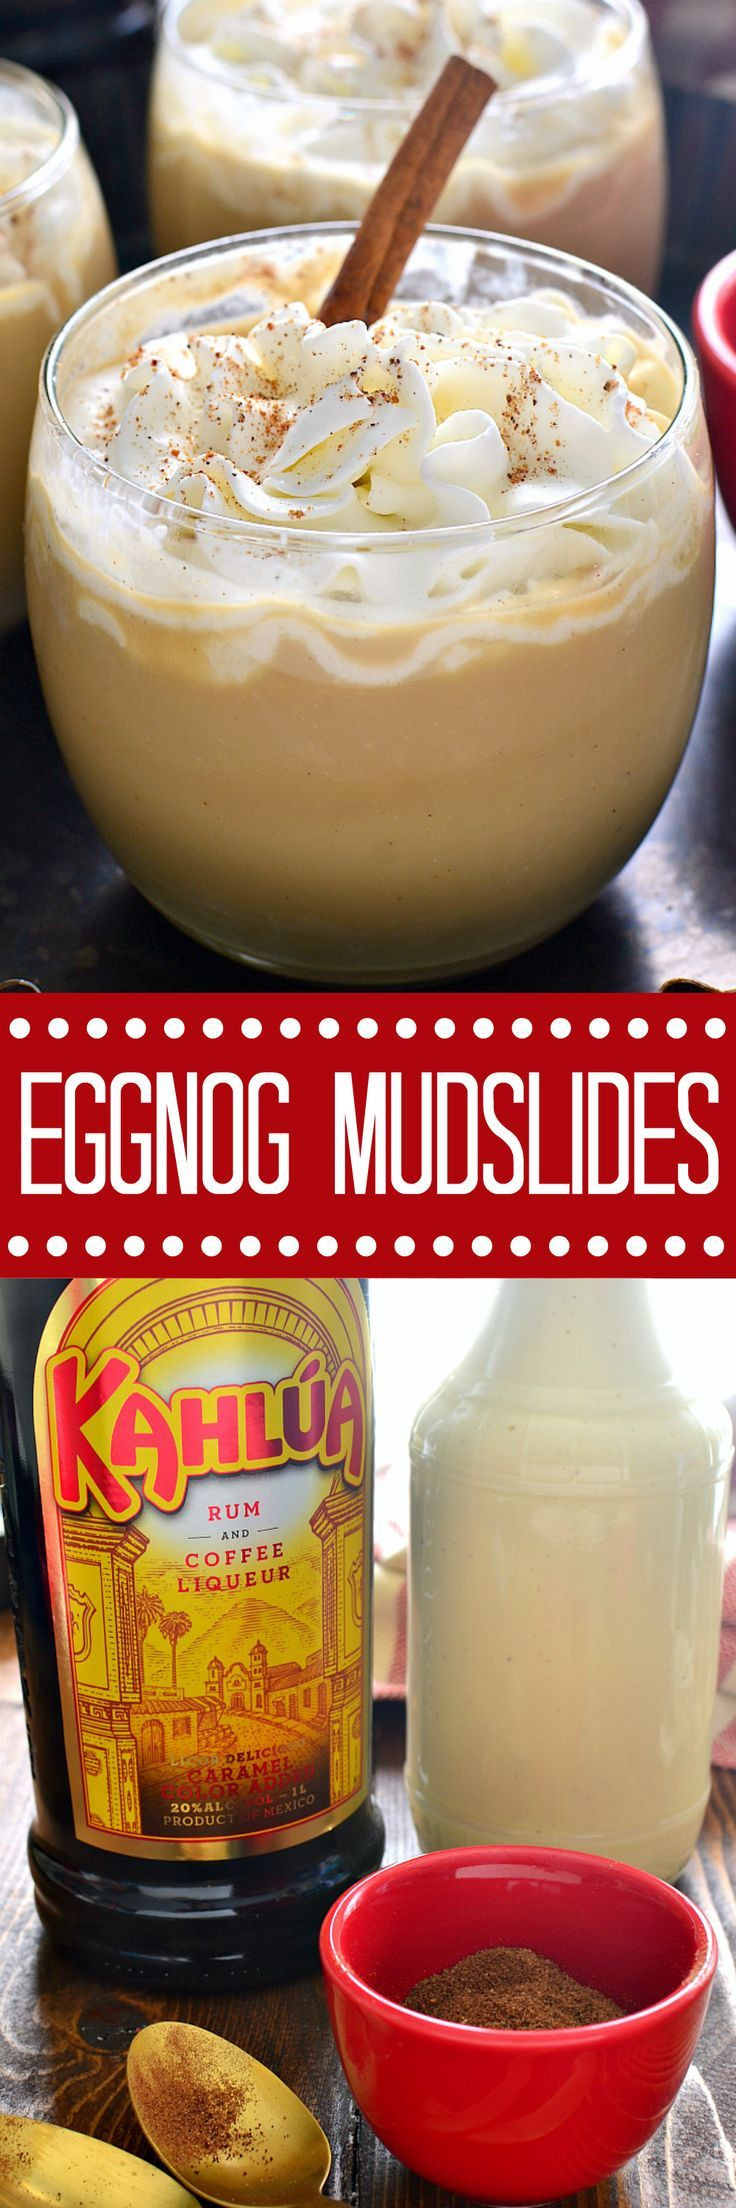 Christmas Eggnog Drinks
 Eggnog Mudslides are a delicious holiday twist on a